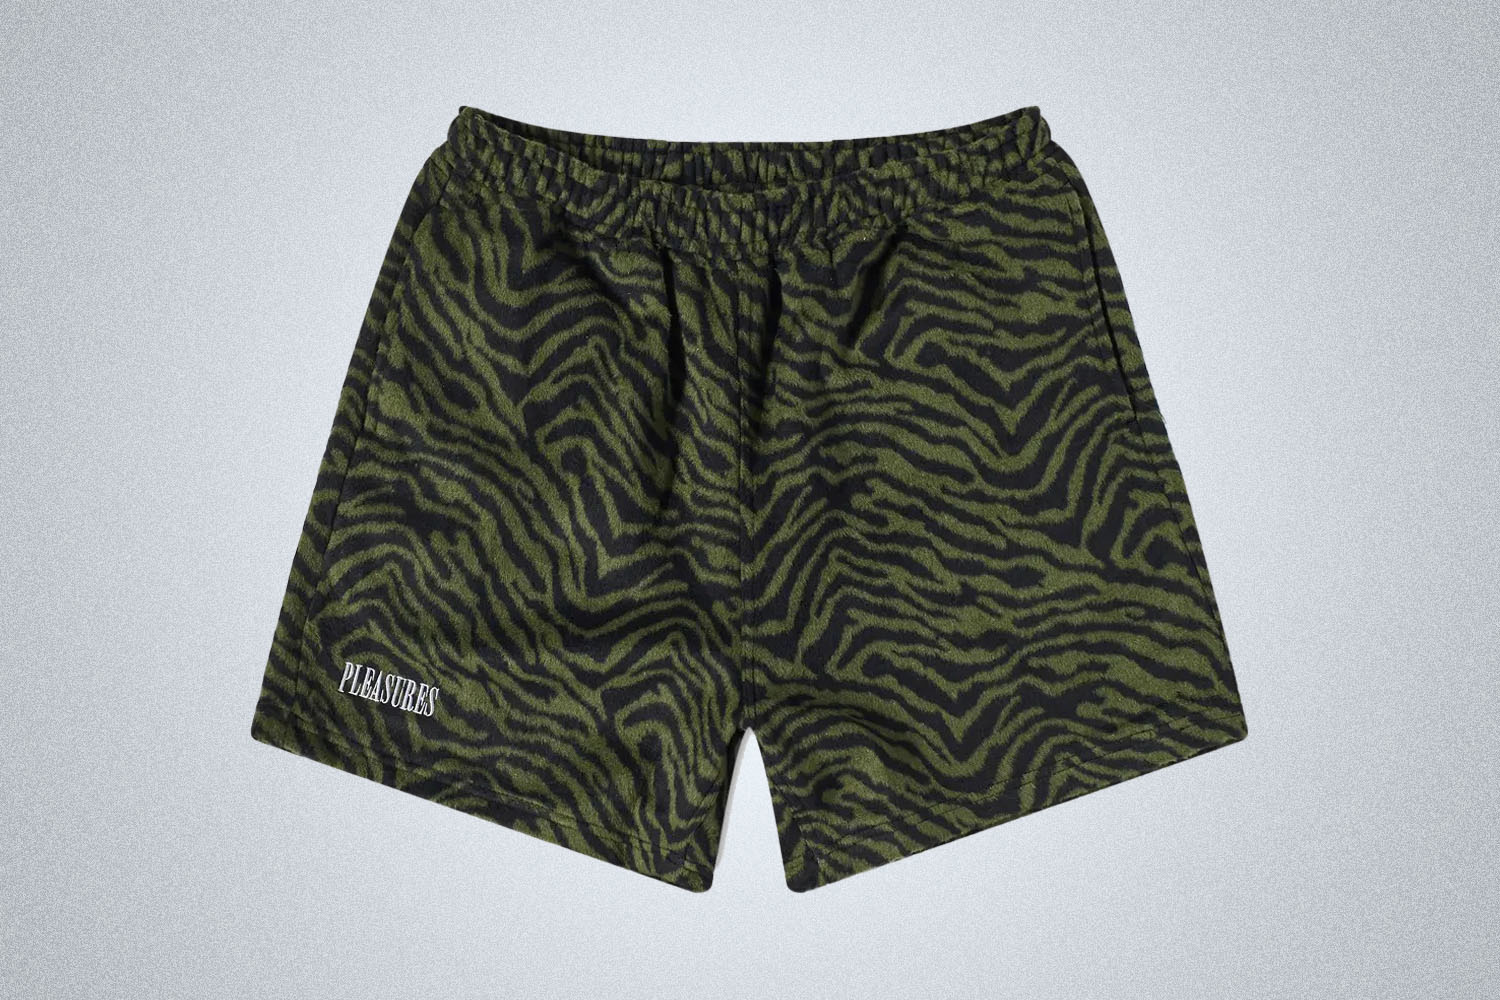 a pair of green pleasures shorts on a grey background